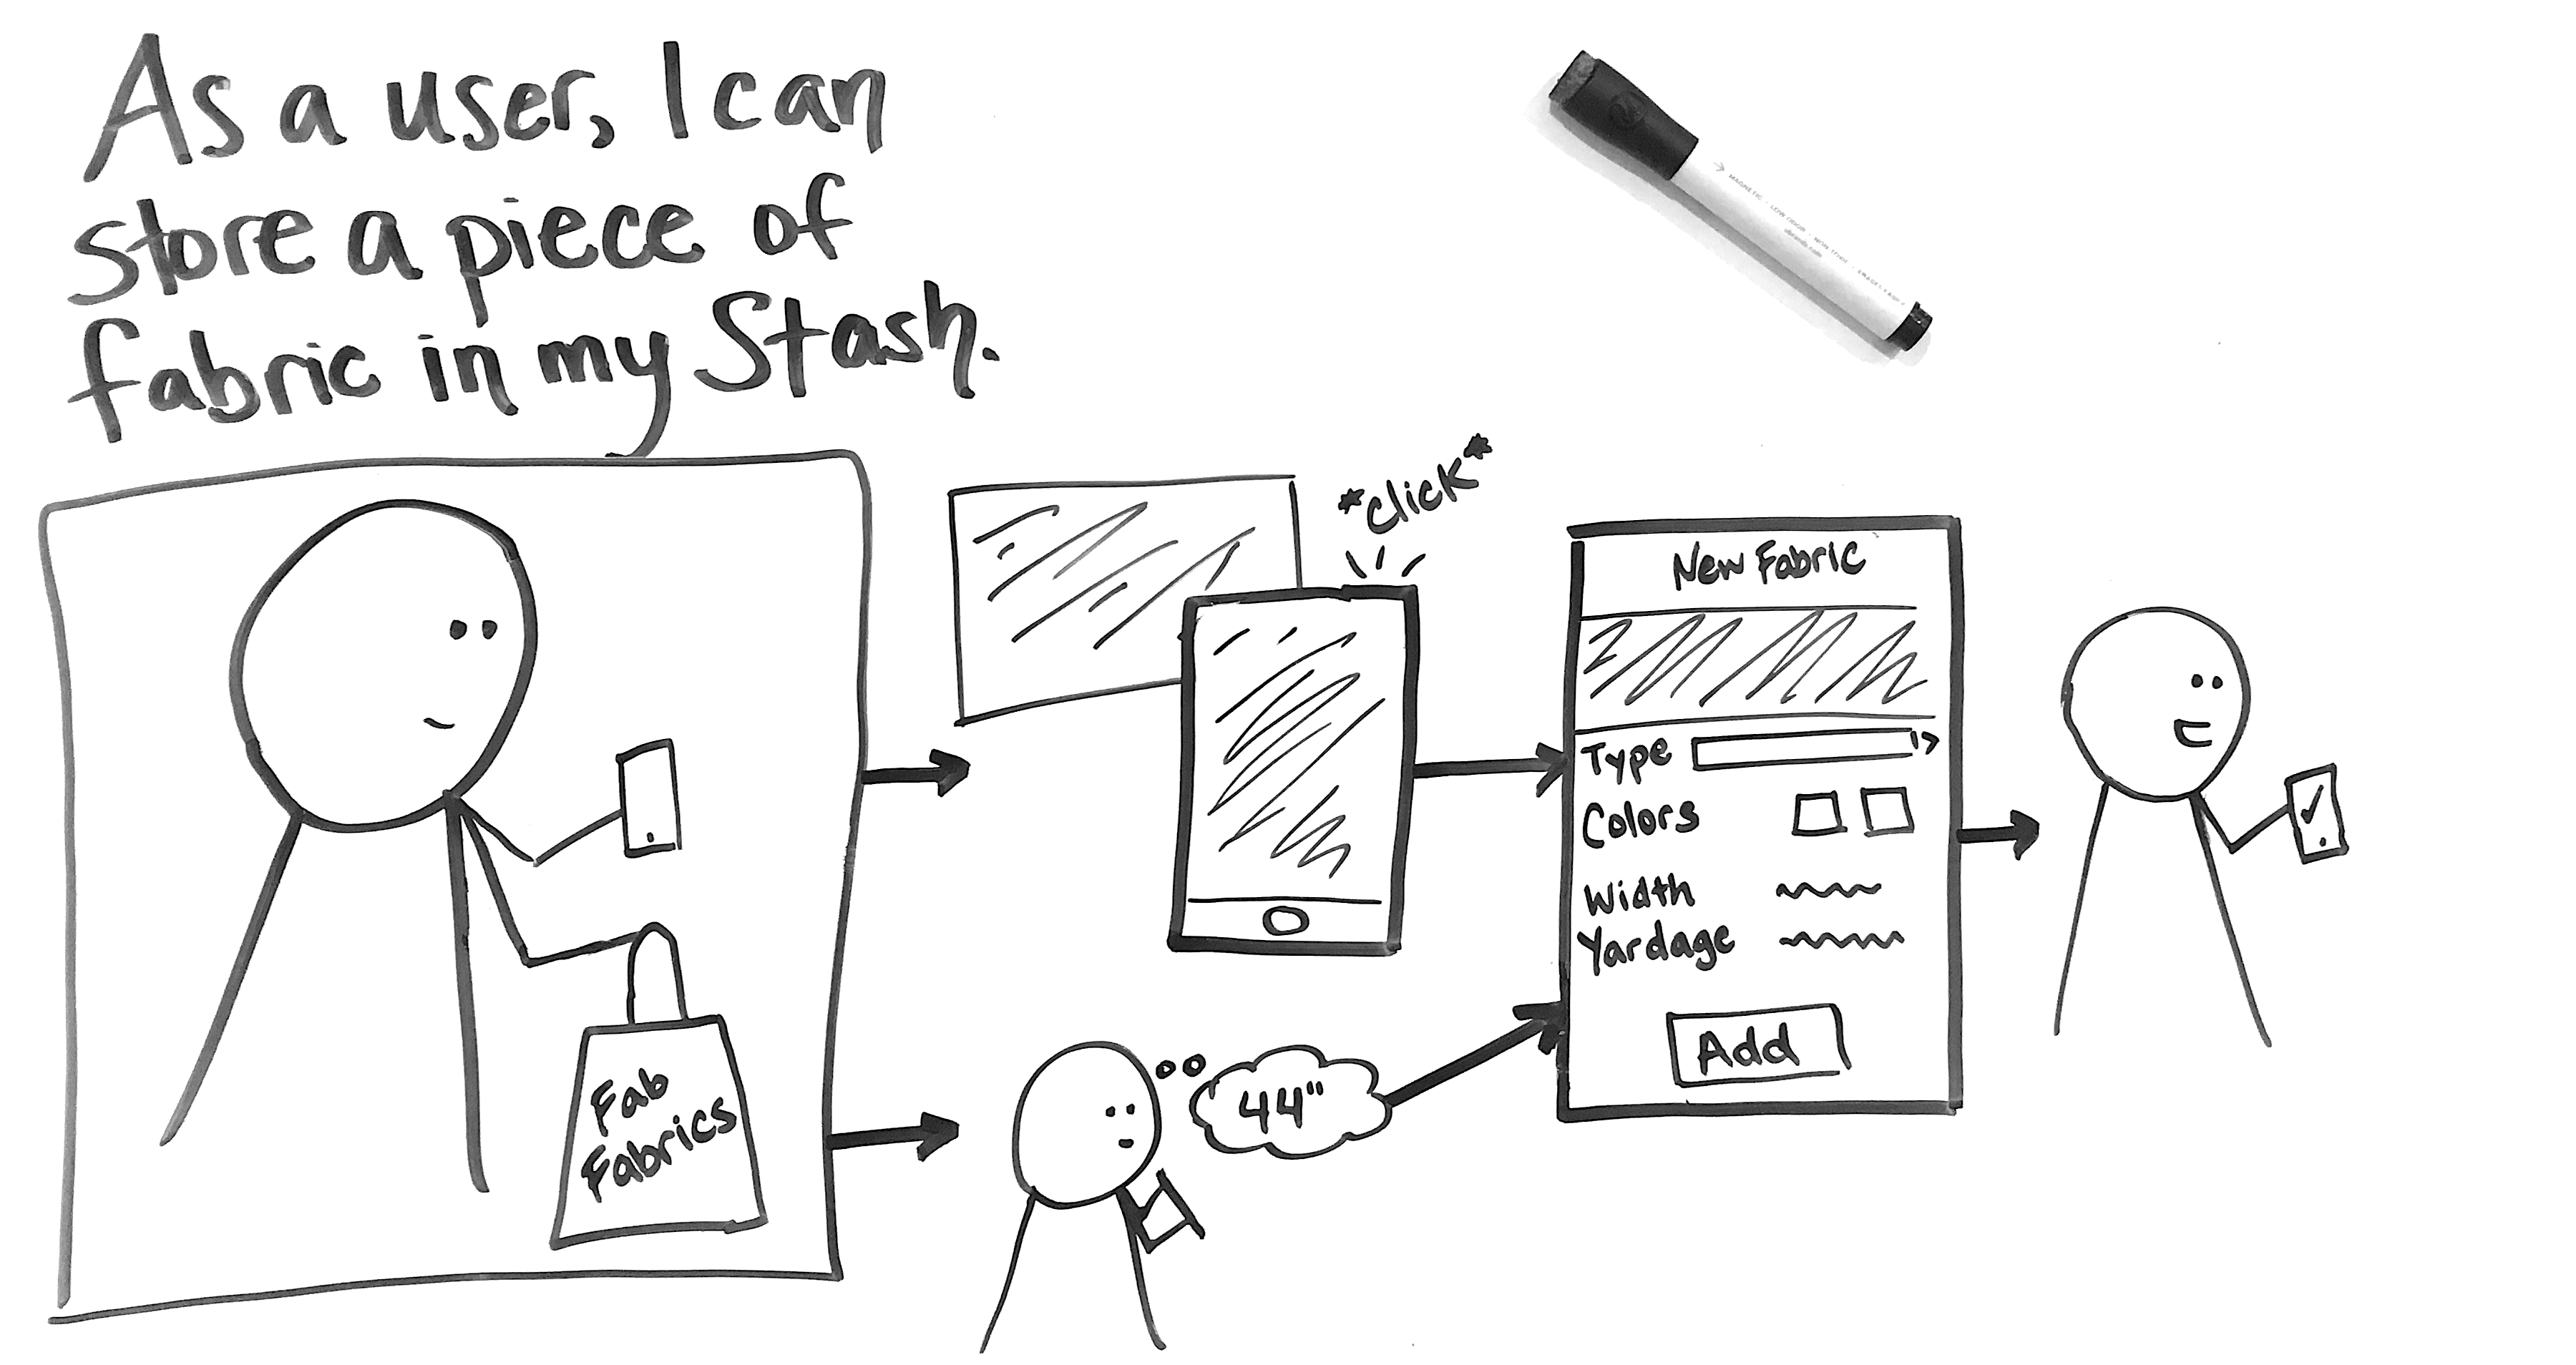 Figure 1.02 is a user story sketch showing a user adding a new fabric to the Stash app